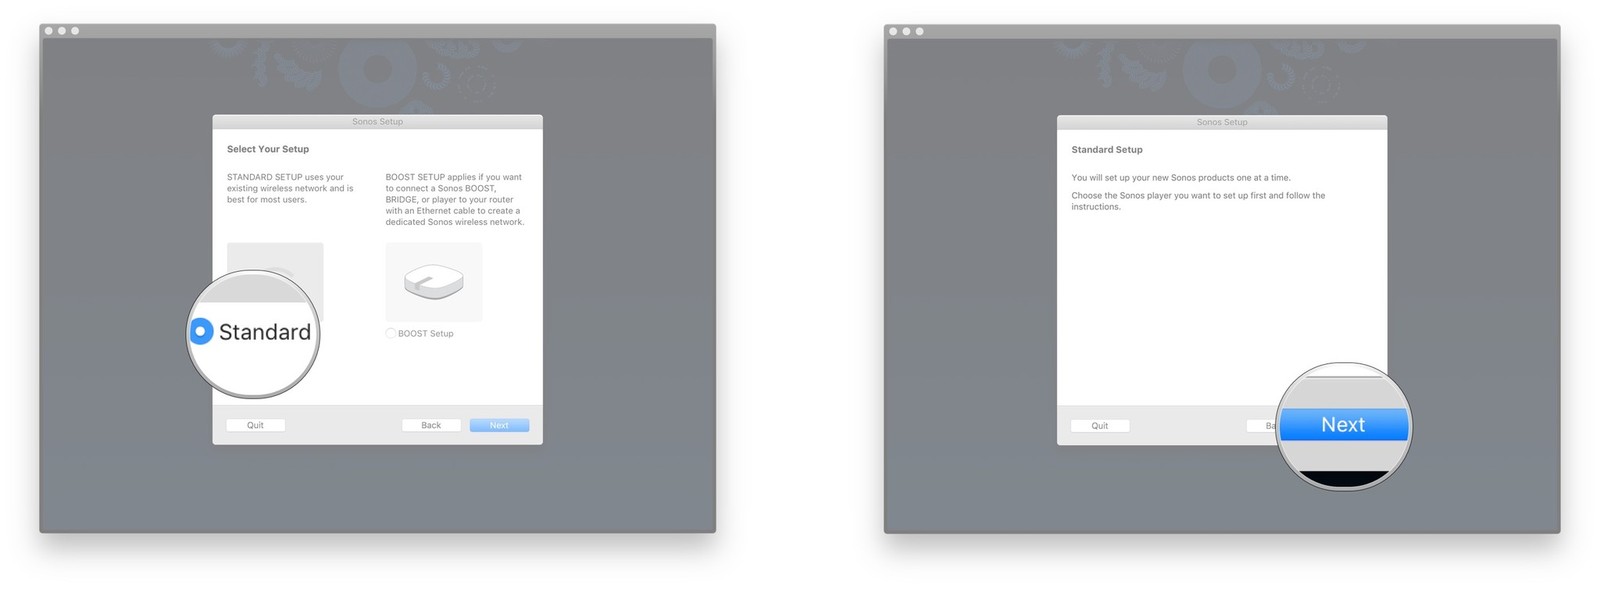 Sonos app on mac cannot find existing sonos networks